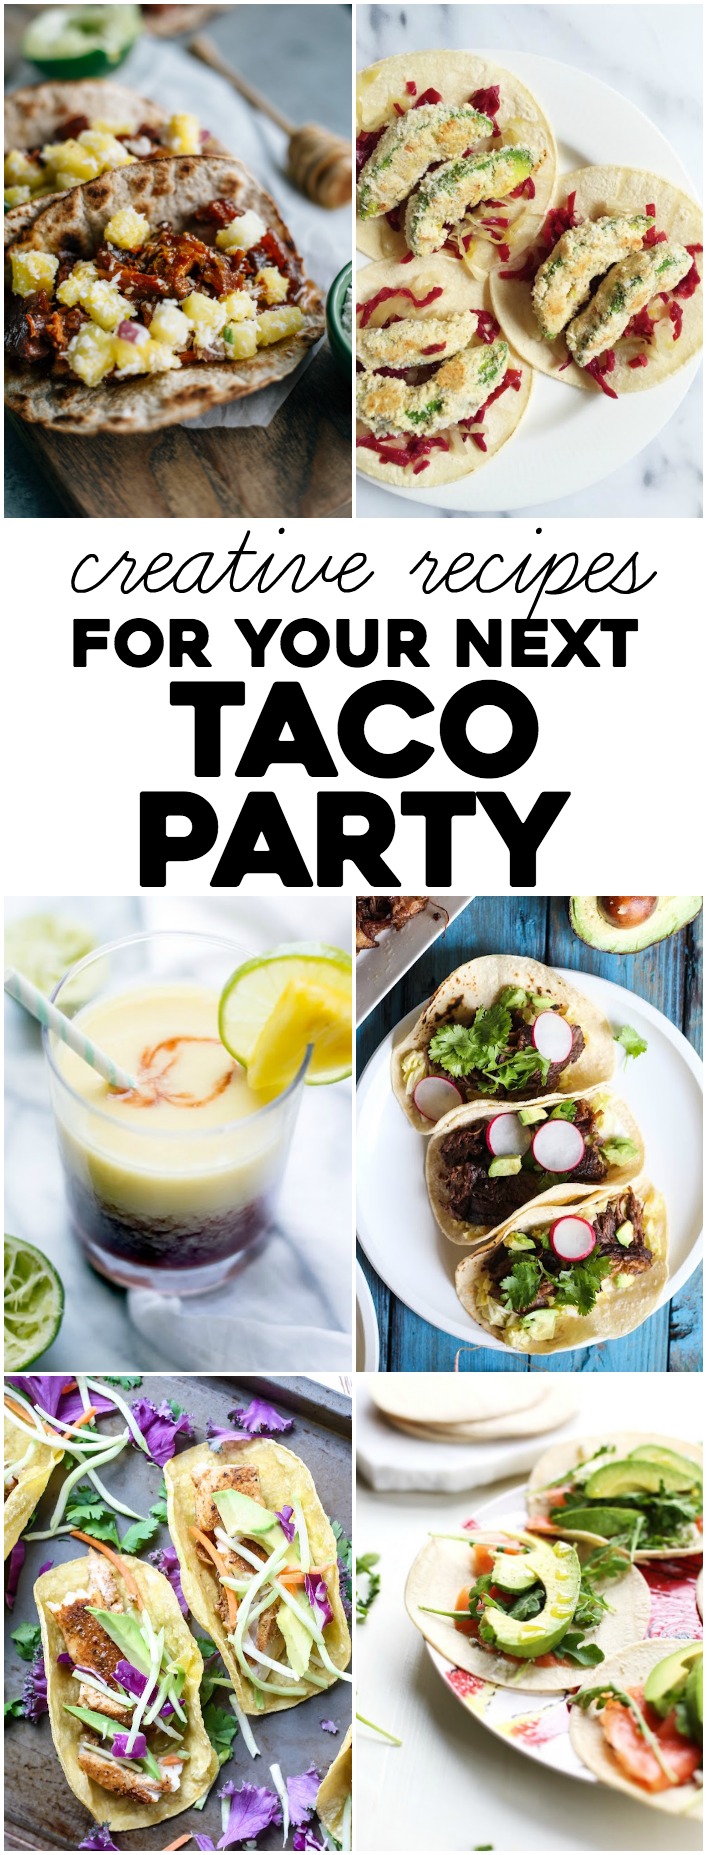 6 creative recipes for your next taco party!